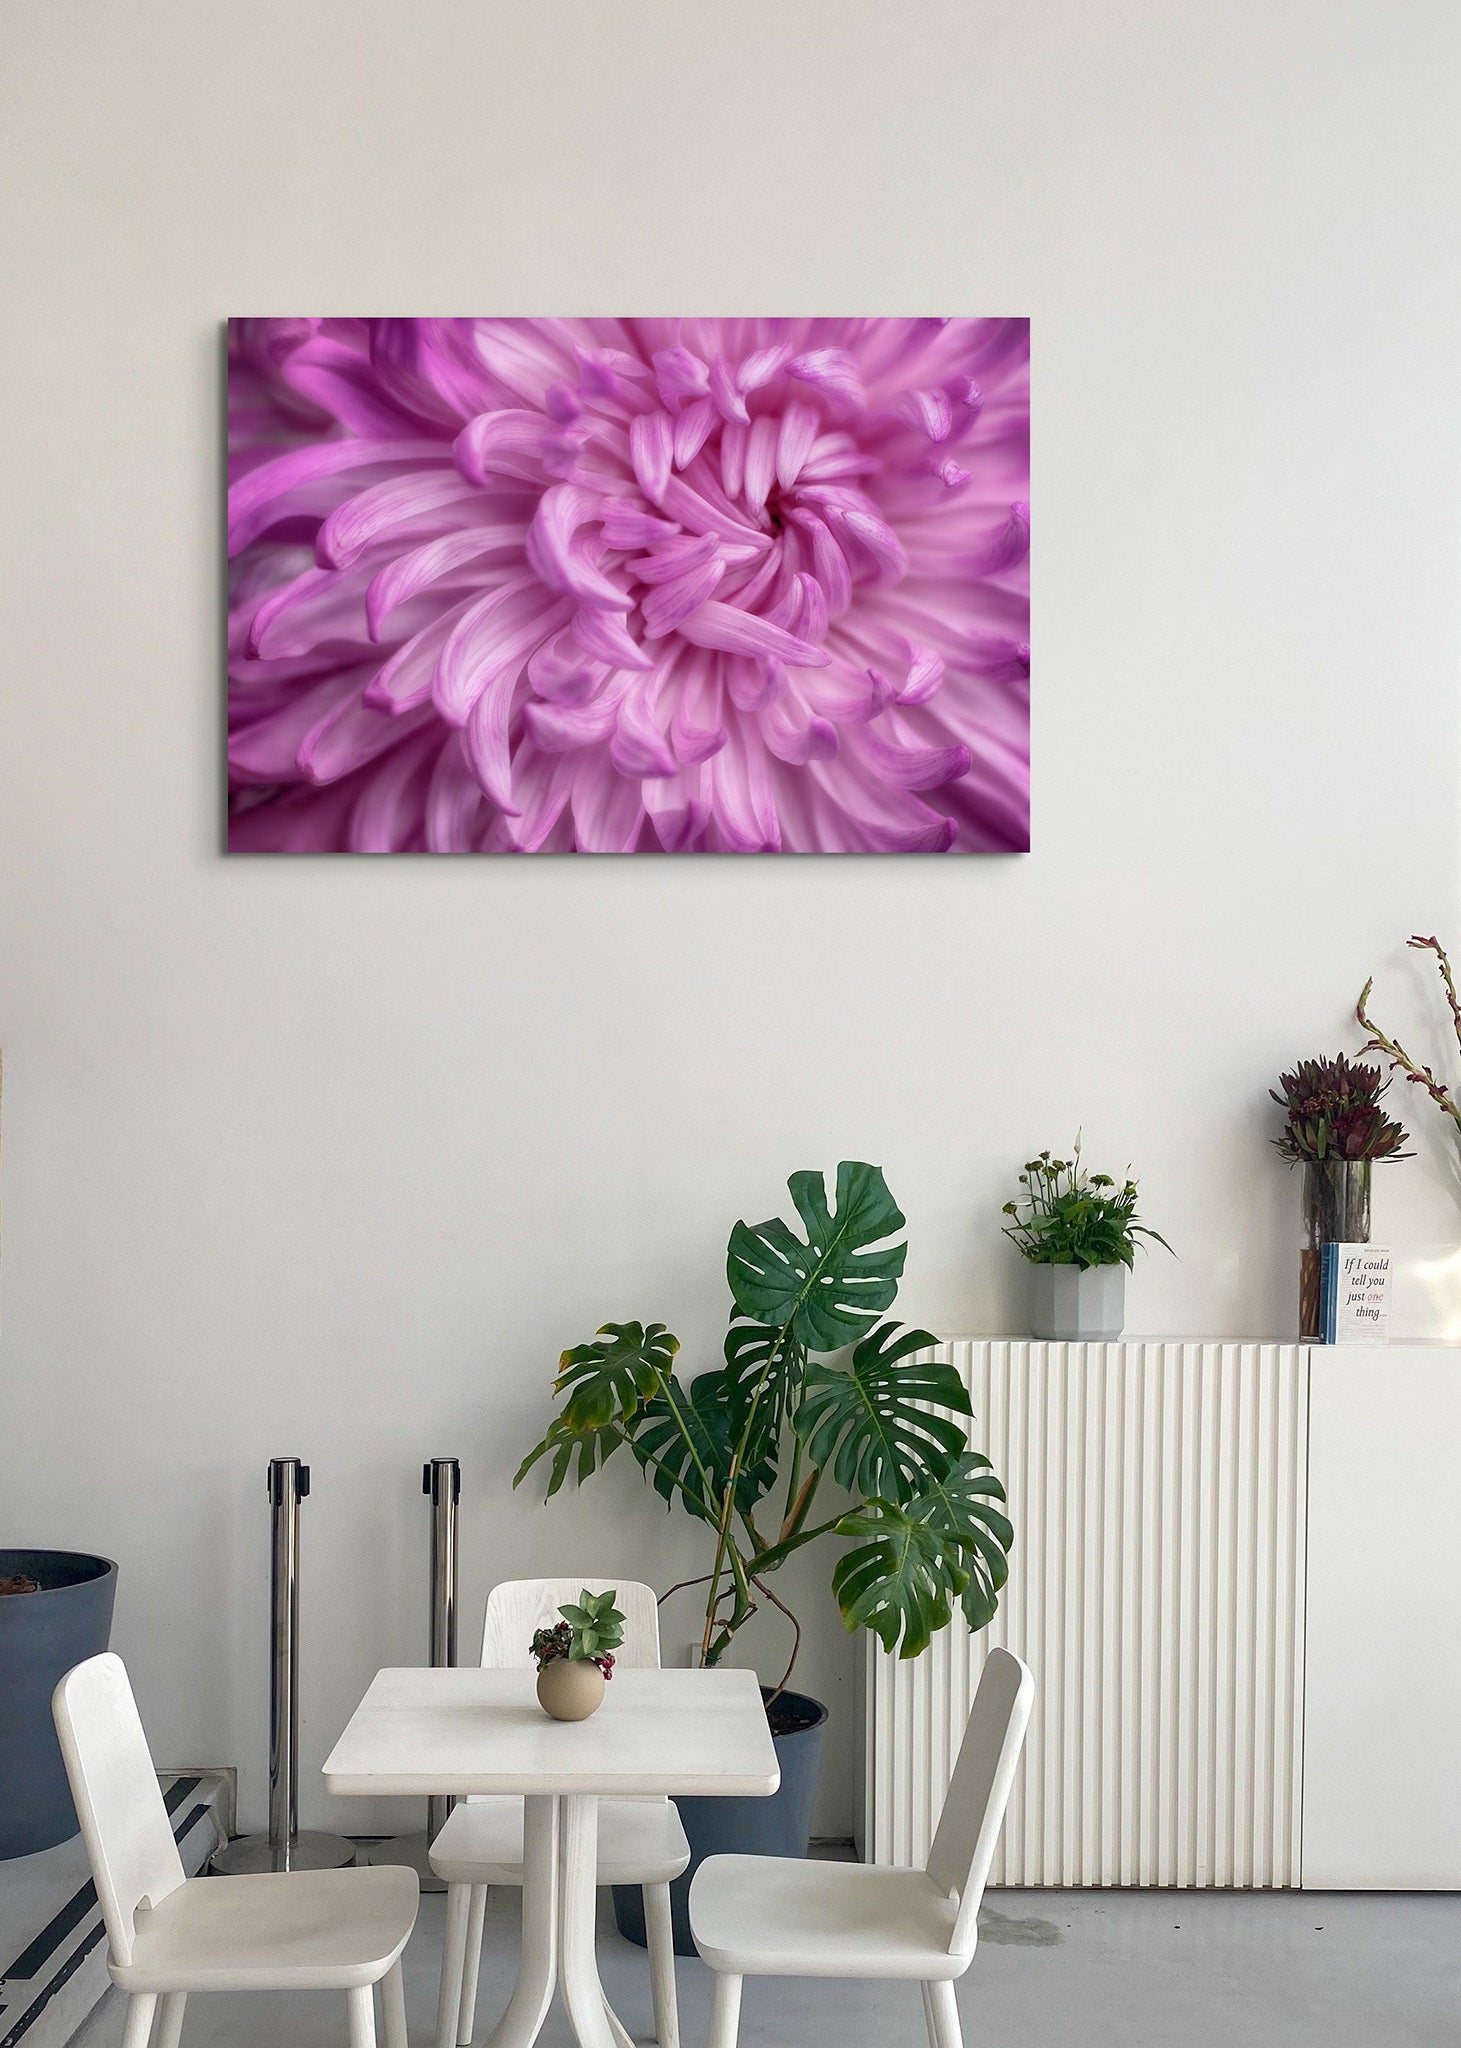 Picture hanging on the wall of a dining room. The picture is a fine art photograph of a pink Chrysanthemum flower titled "Self Love" by Cameron Dreaux of Dreaux Fine Art. 